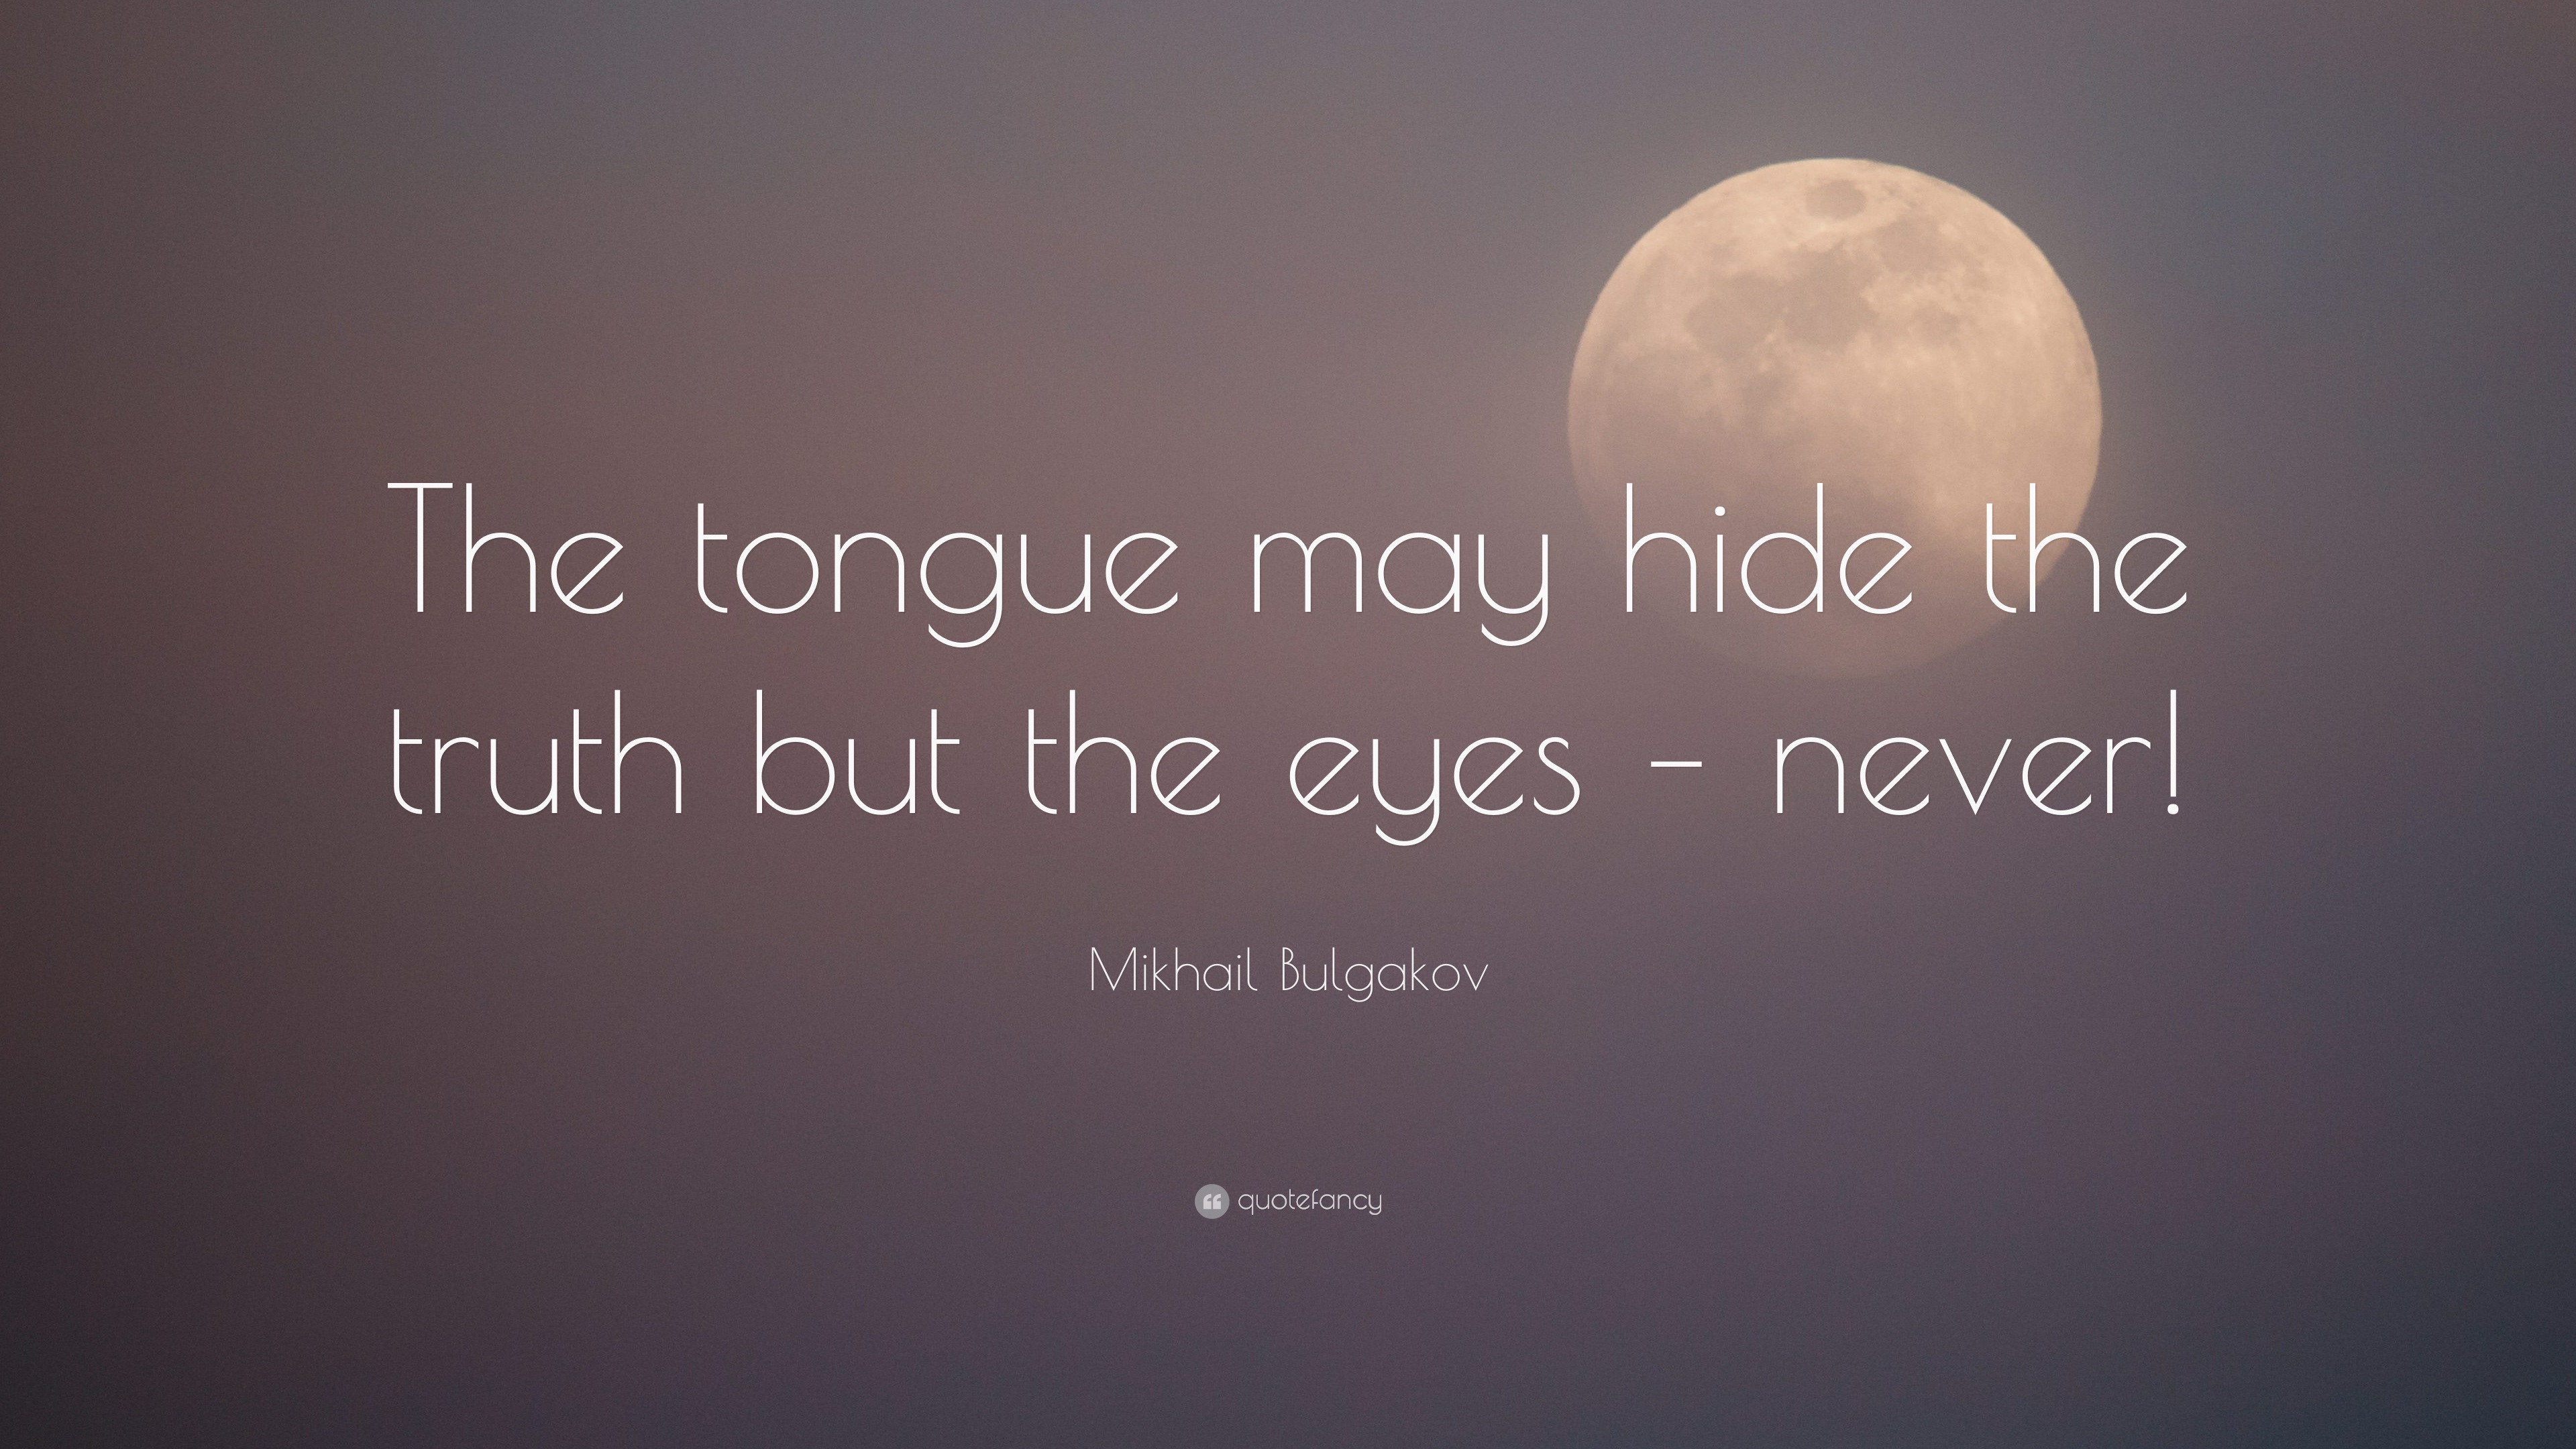 Mikhail Bulgakov Quote: “The Tongue May Hide The Truth But The Eyes – Never!”